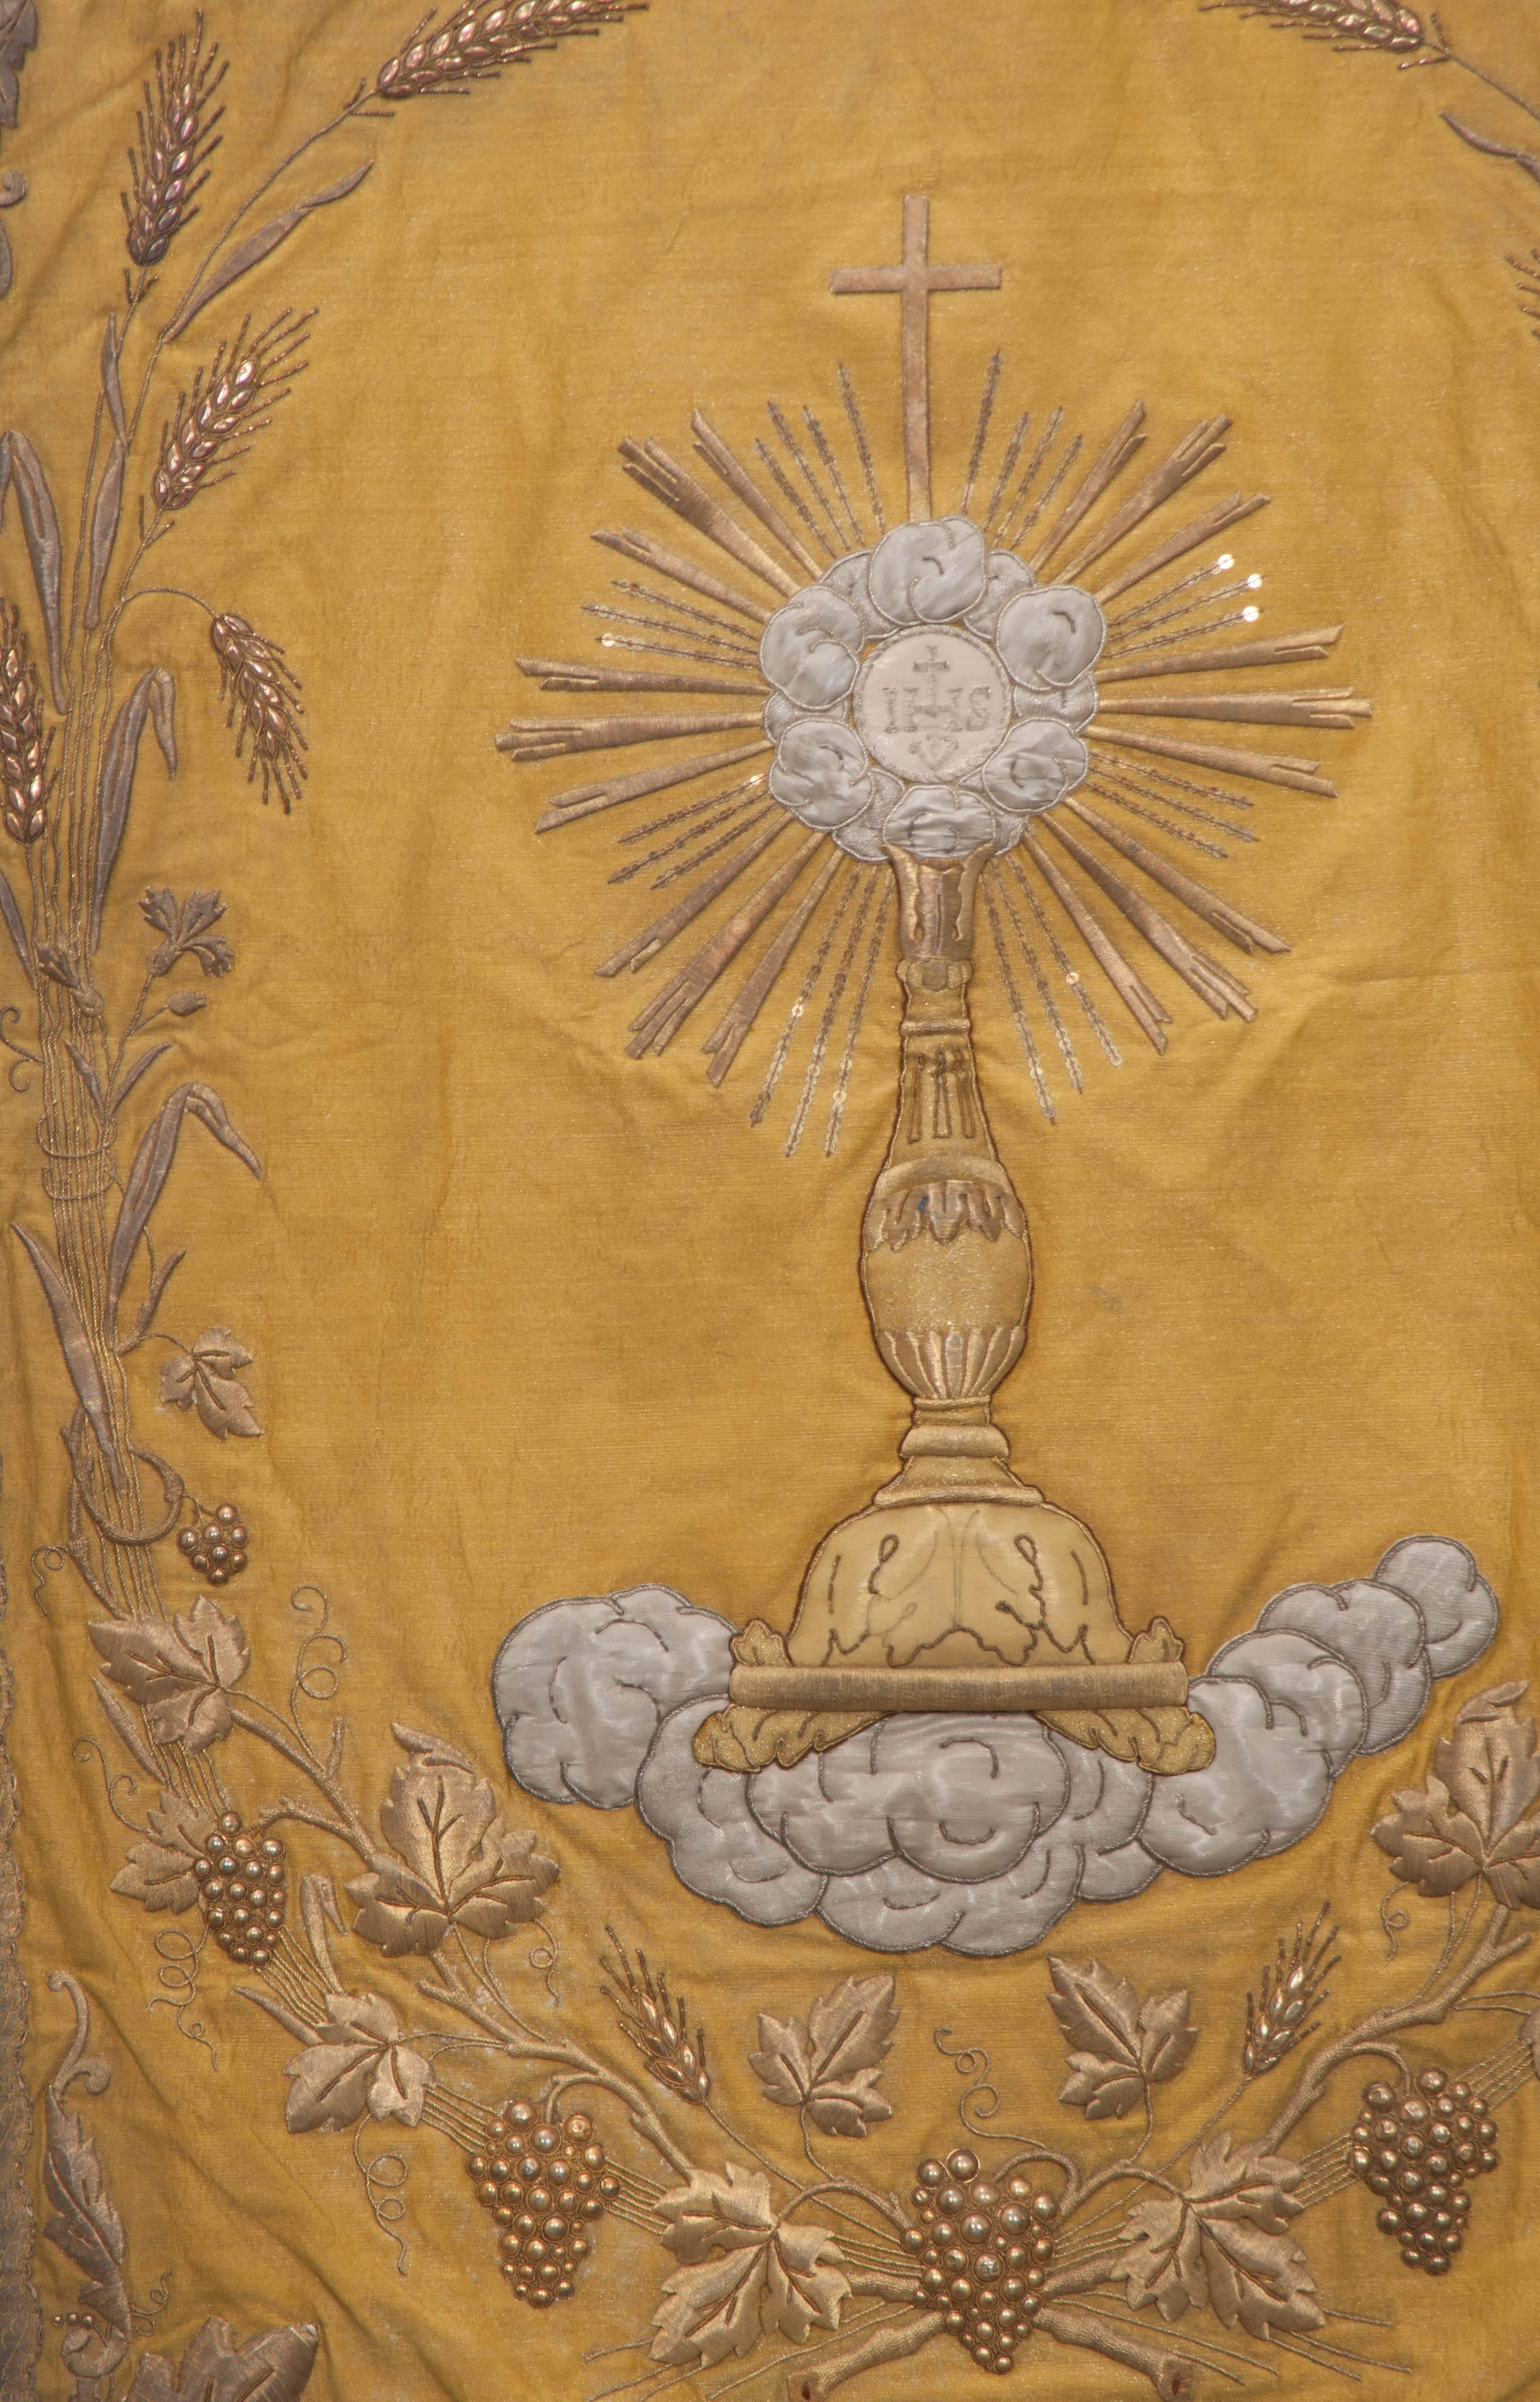 Gilt French 19th Century Metallic Embroidered Religious Banner